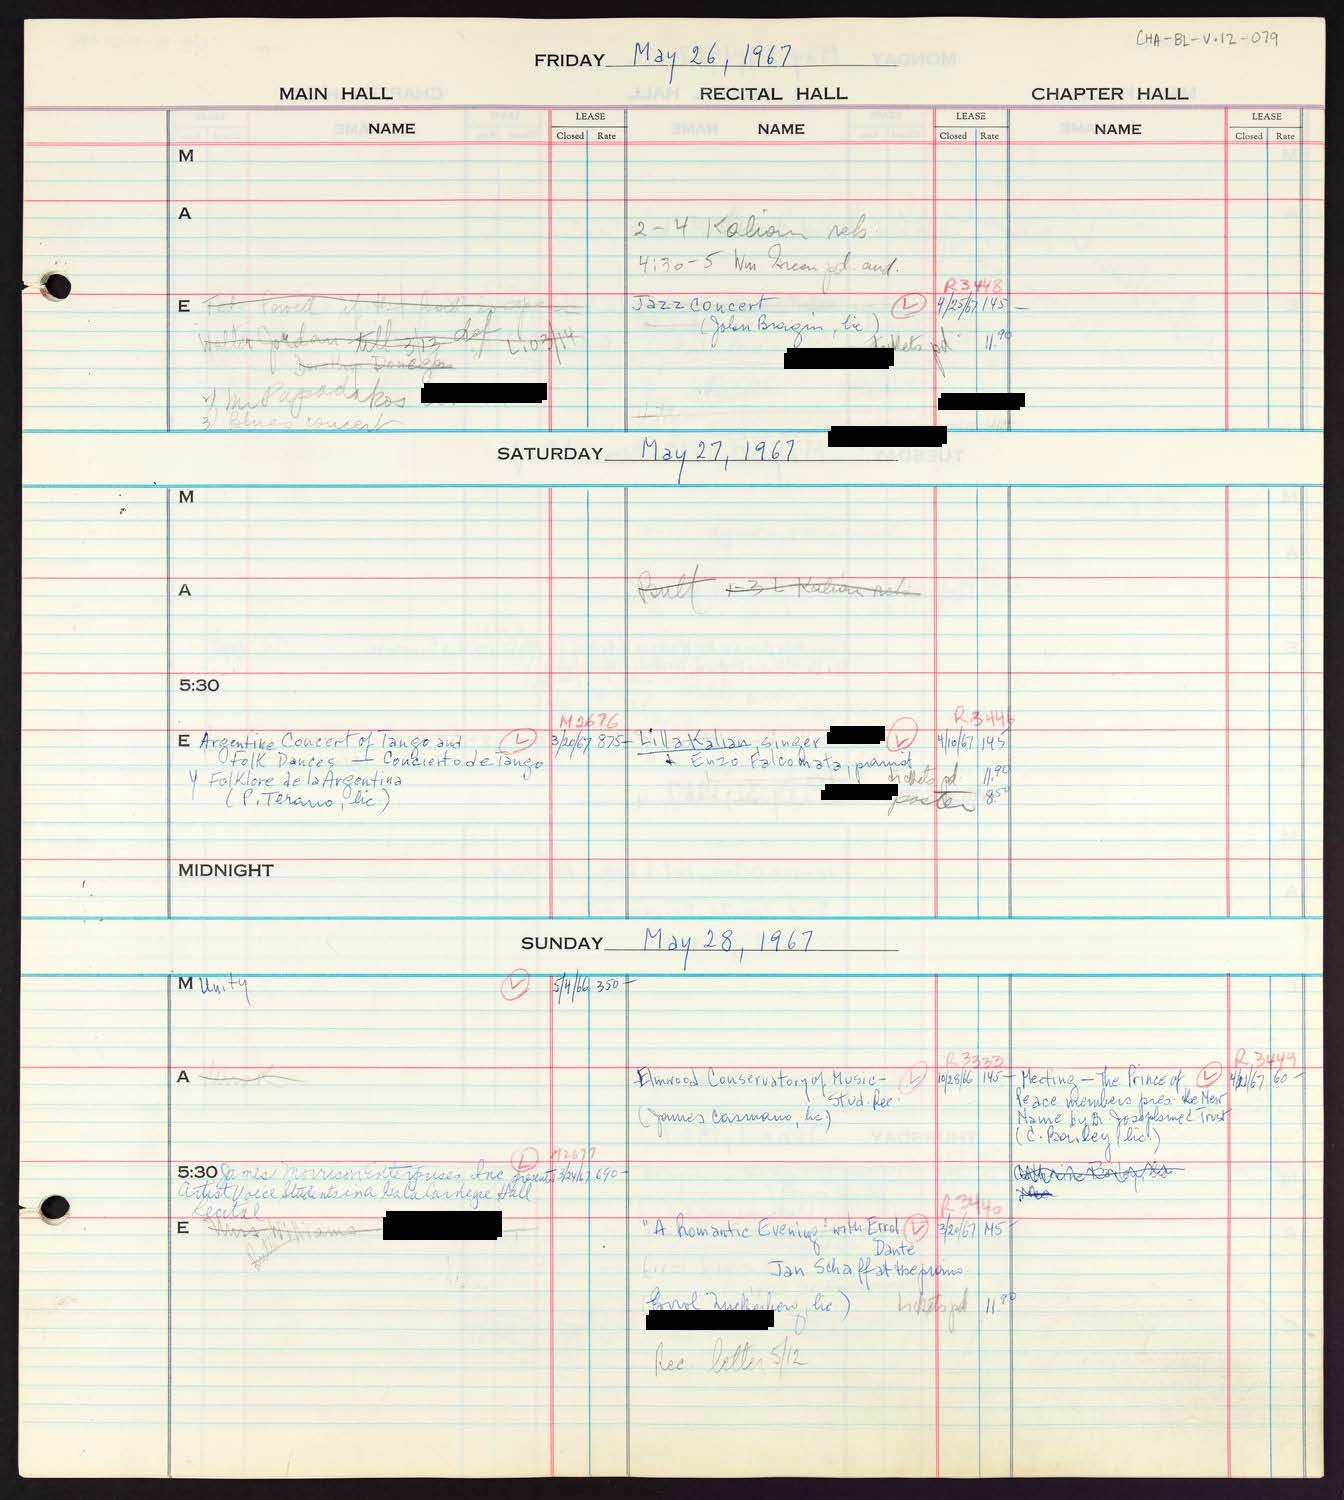 Carnegie Hall Booking Ledger, volume 12, page 79